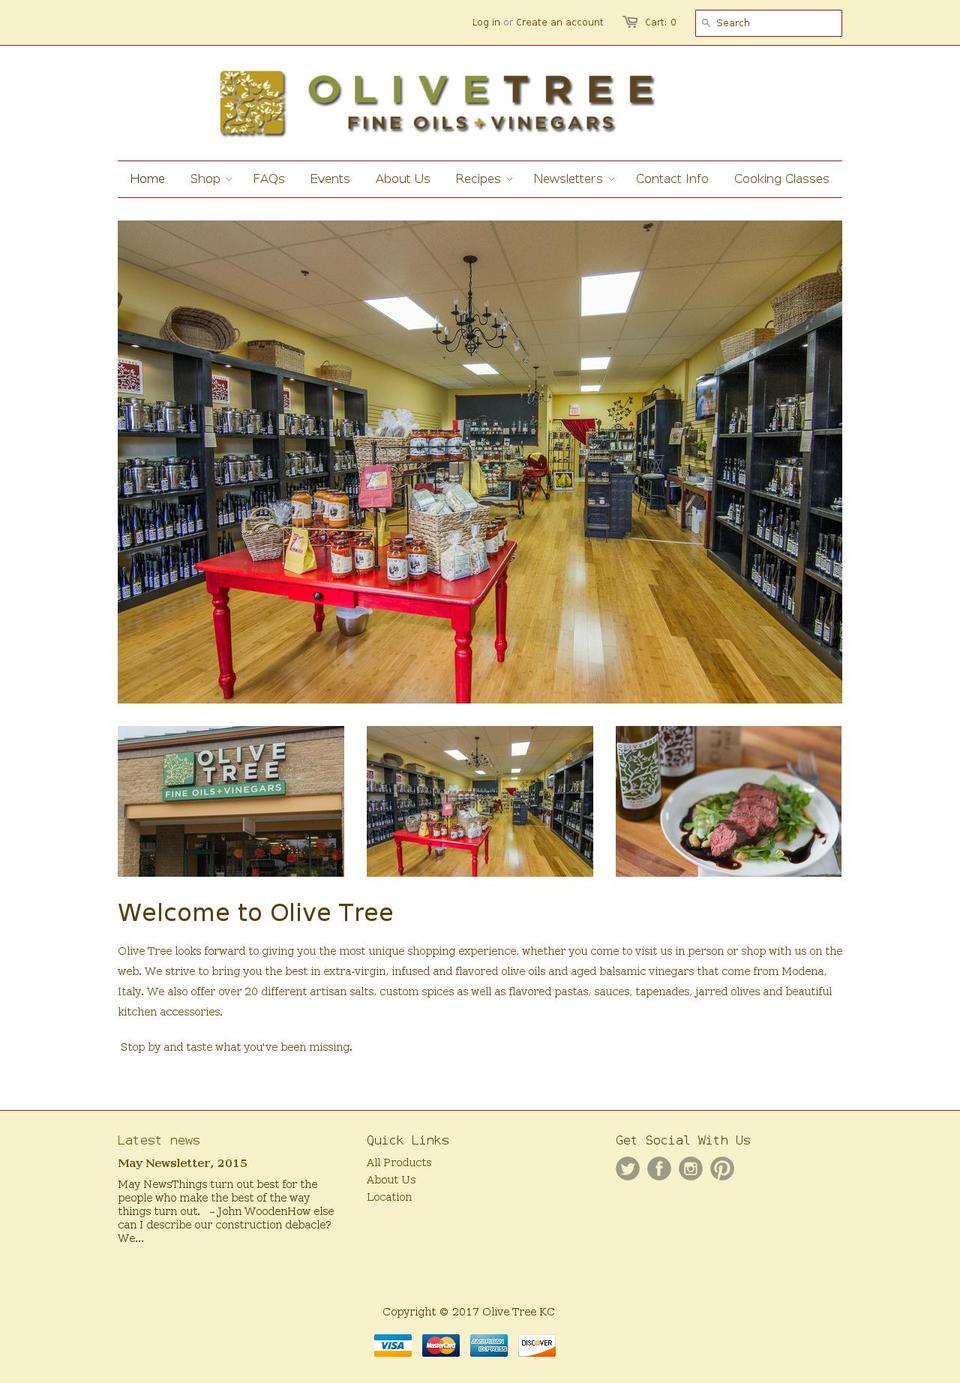 Crave Shopify theme site example olivetreekc.com